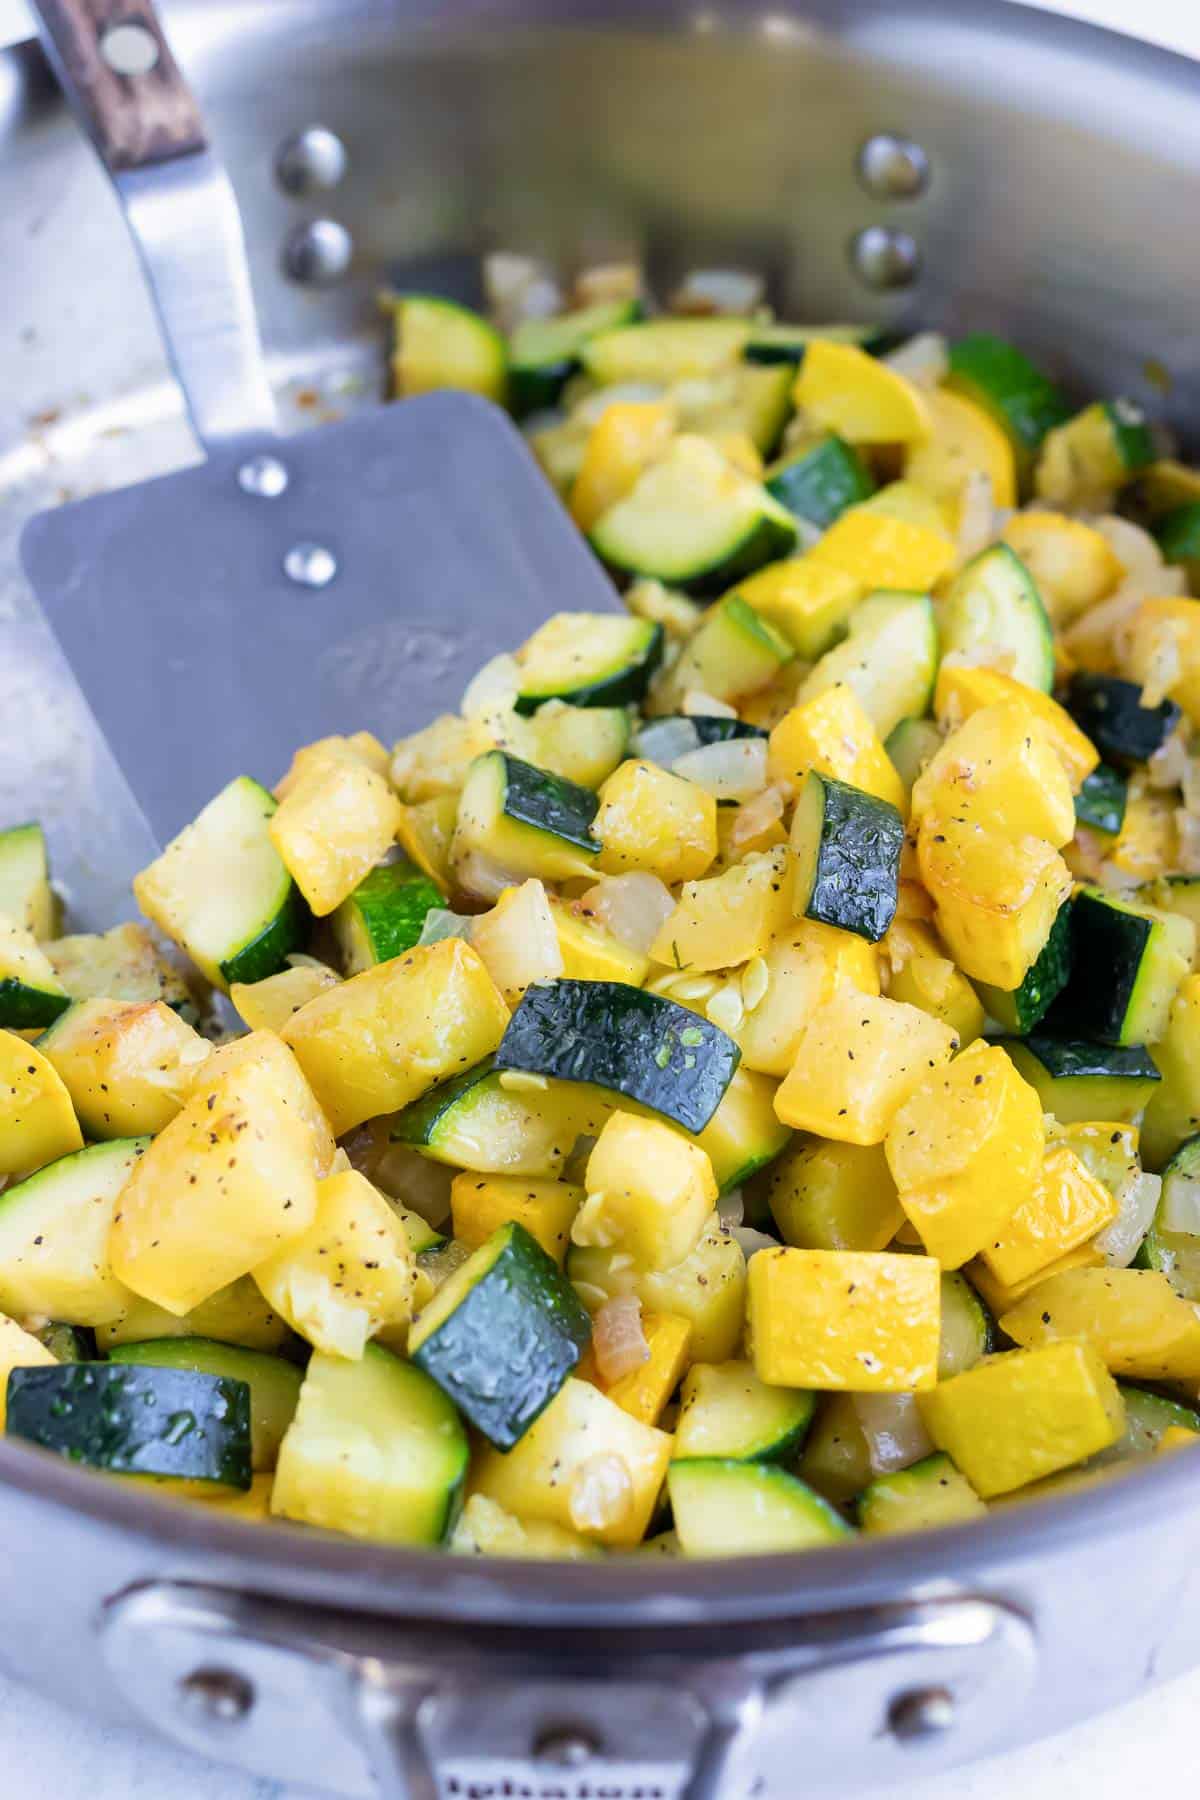 A spatula scooping out a serving of cooked yellow squash and zucchini from a pan.